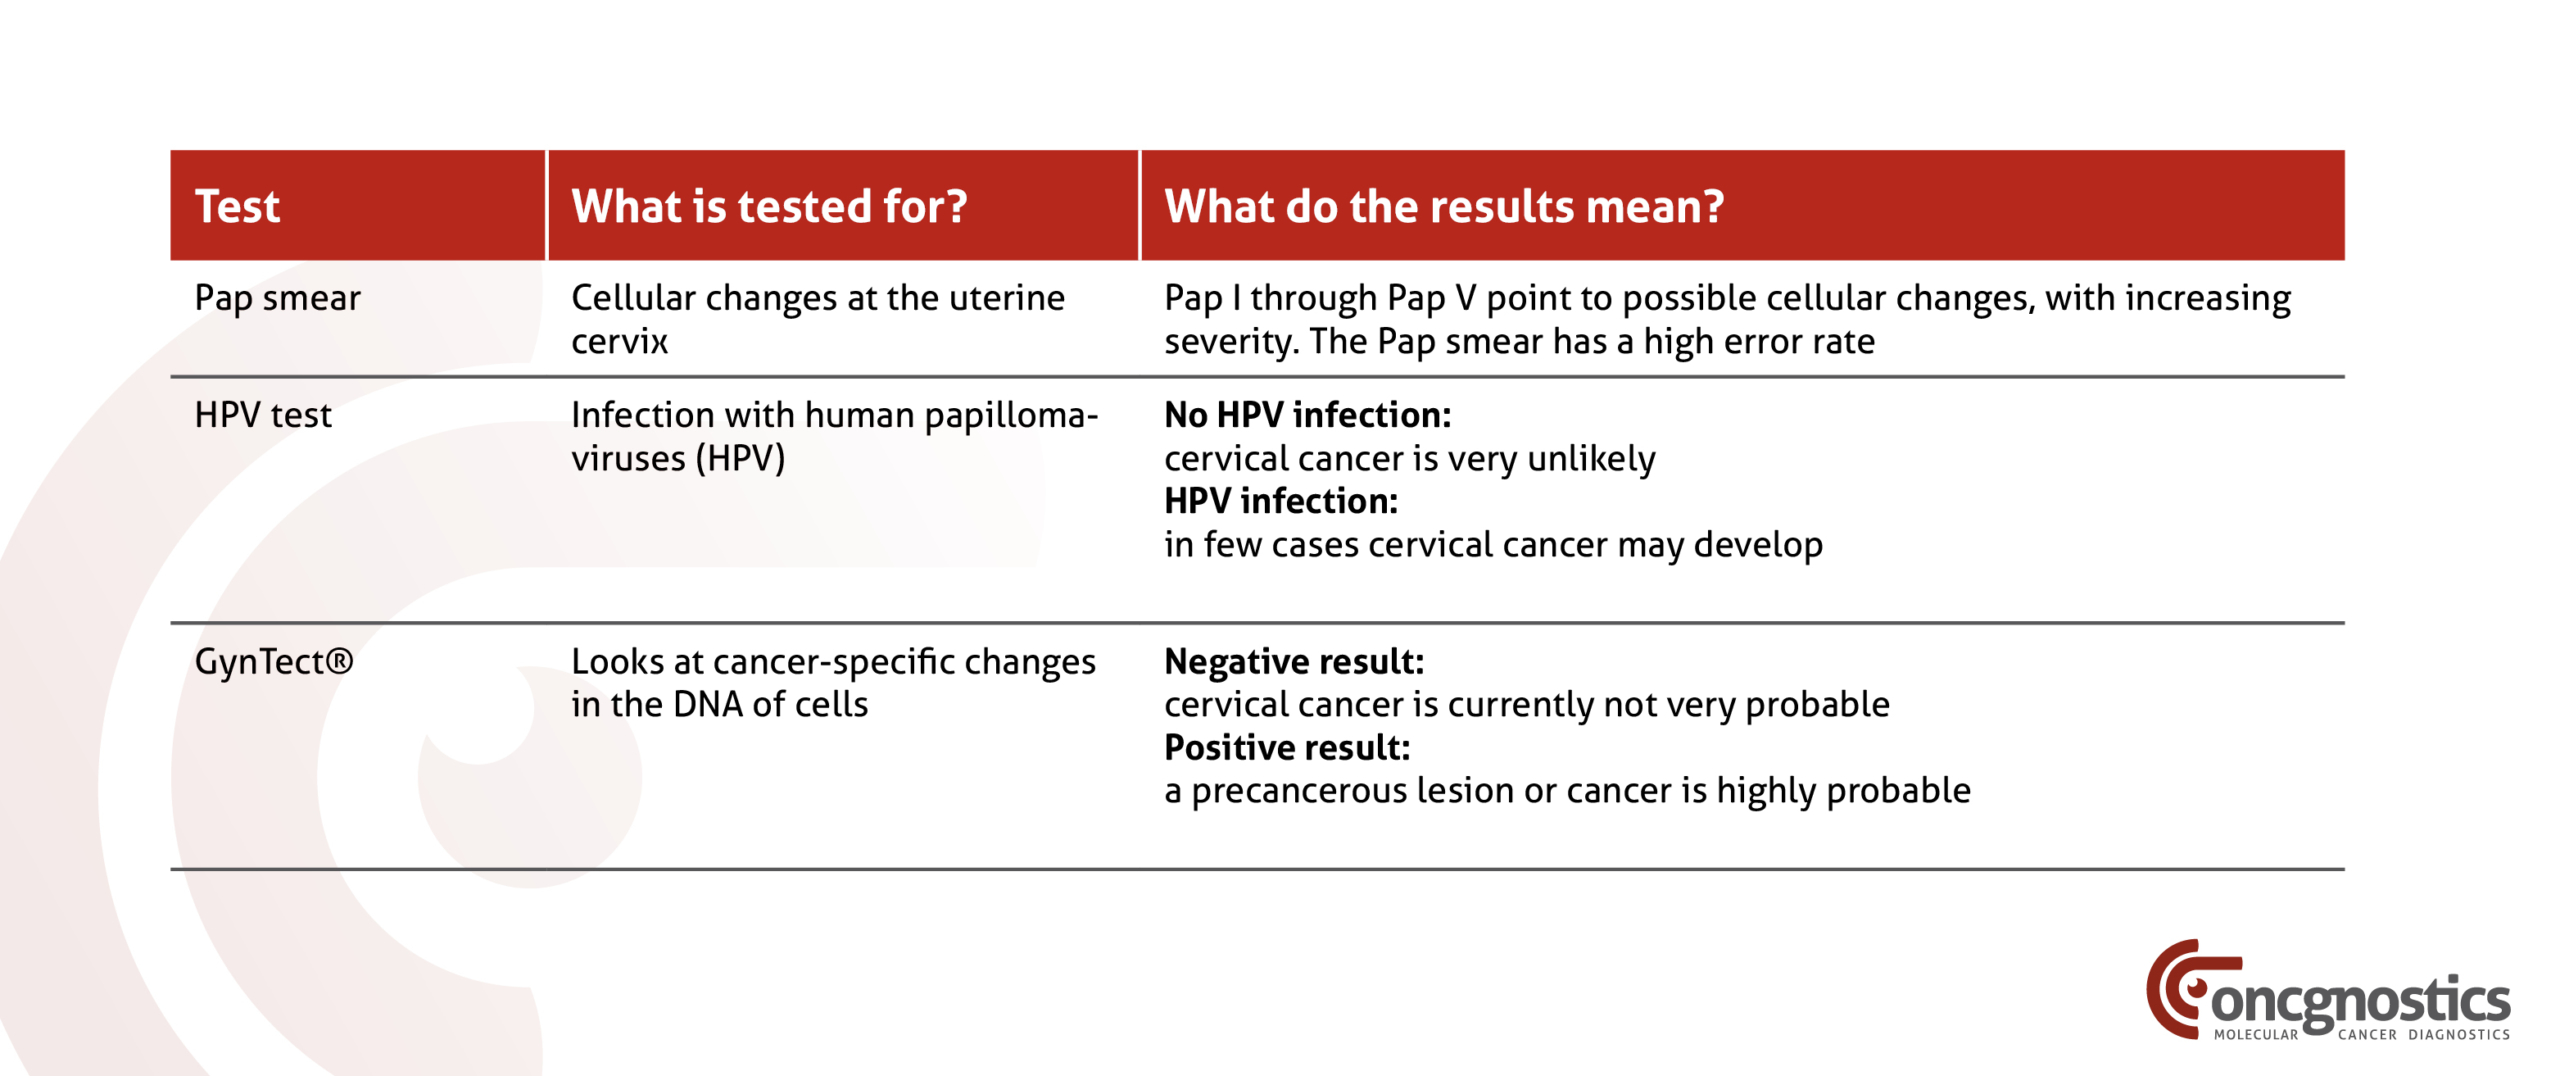 Pap smear, HPV test, GynTect